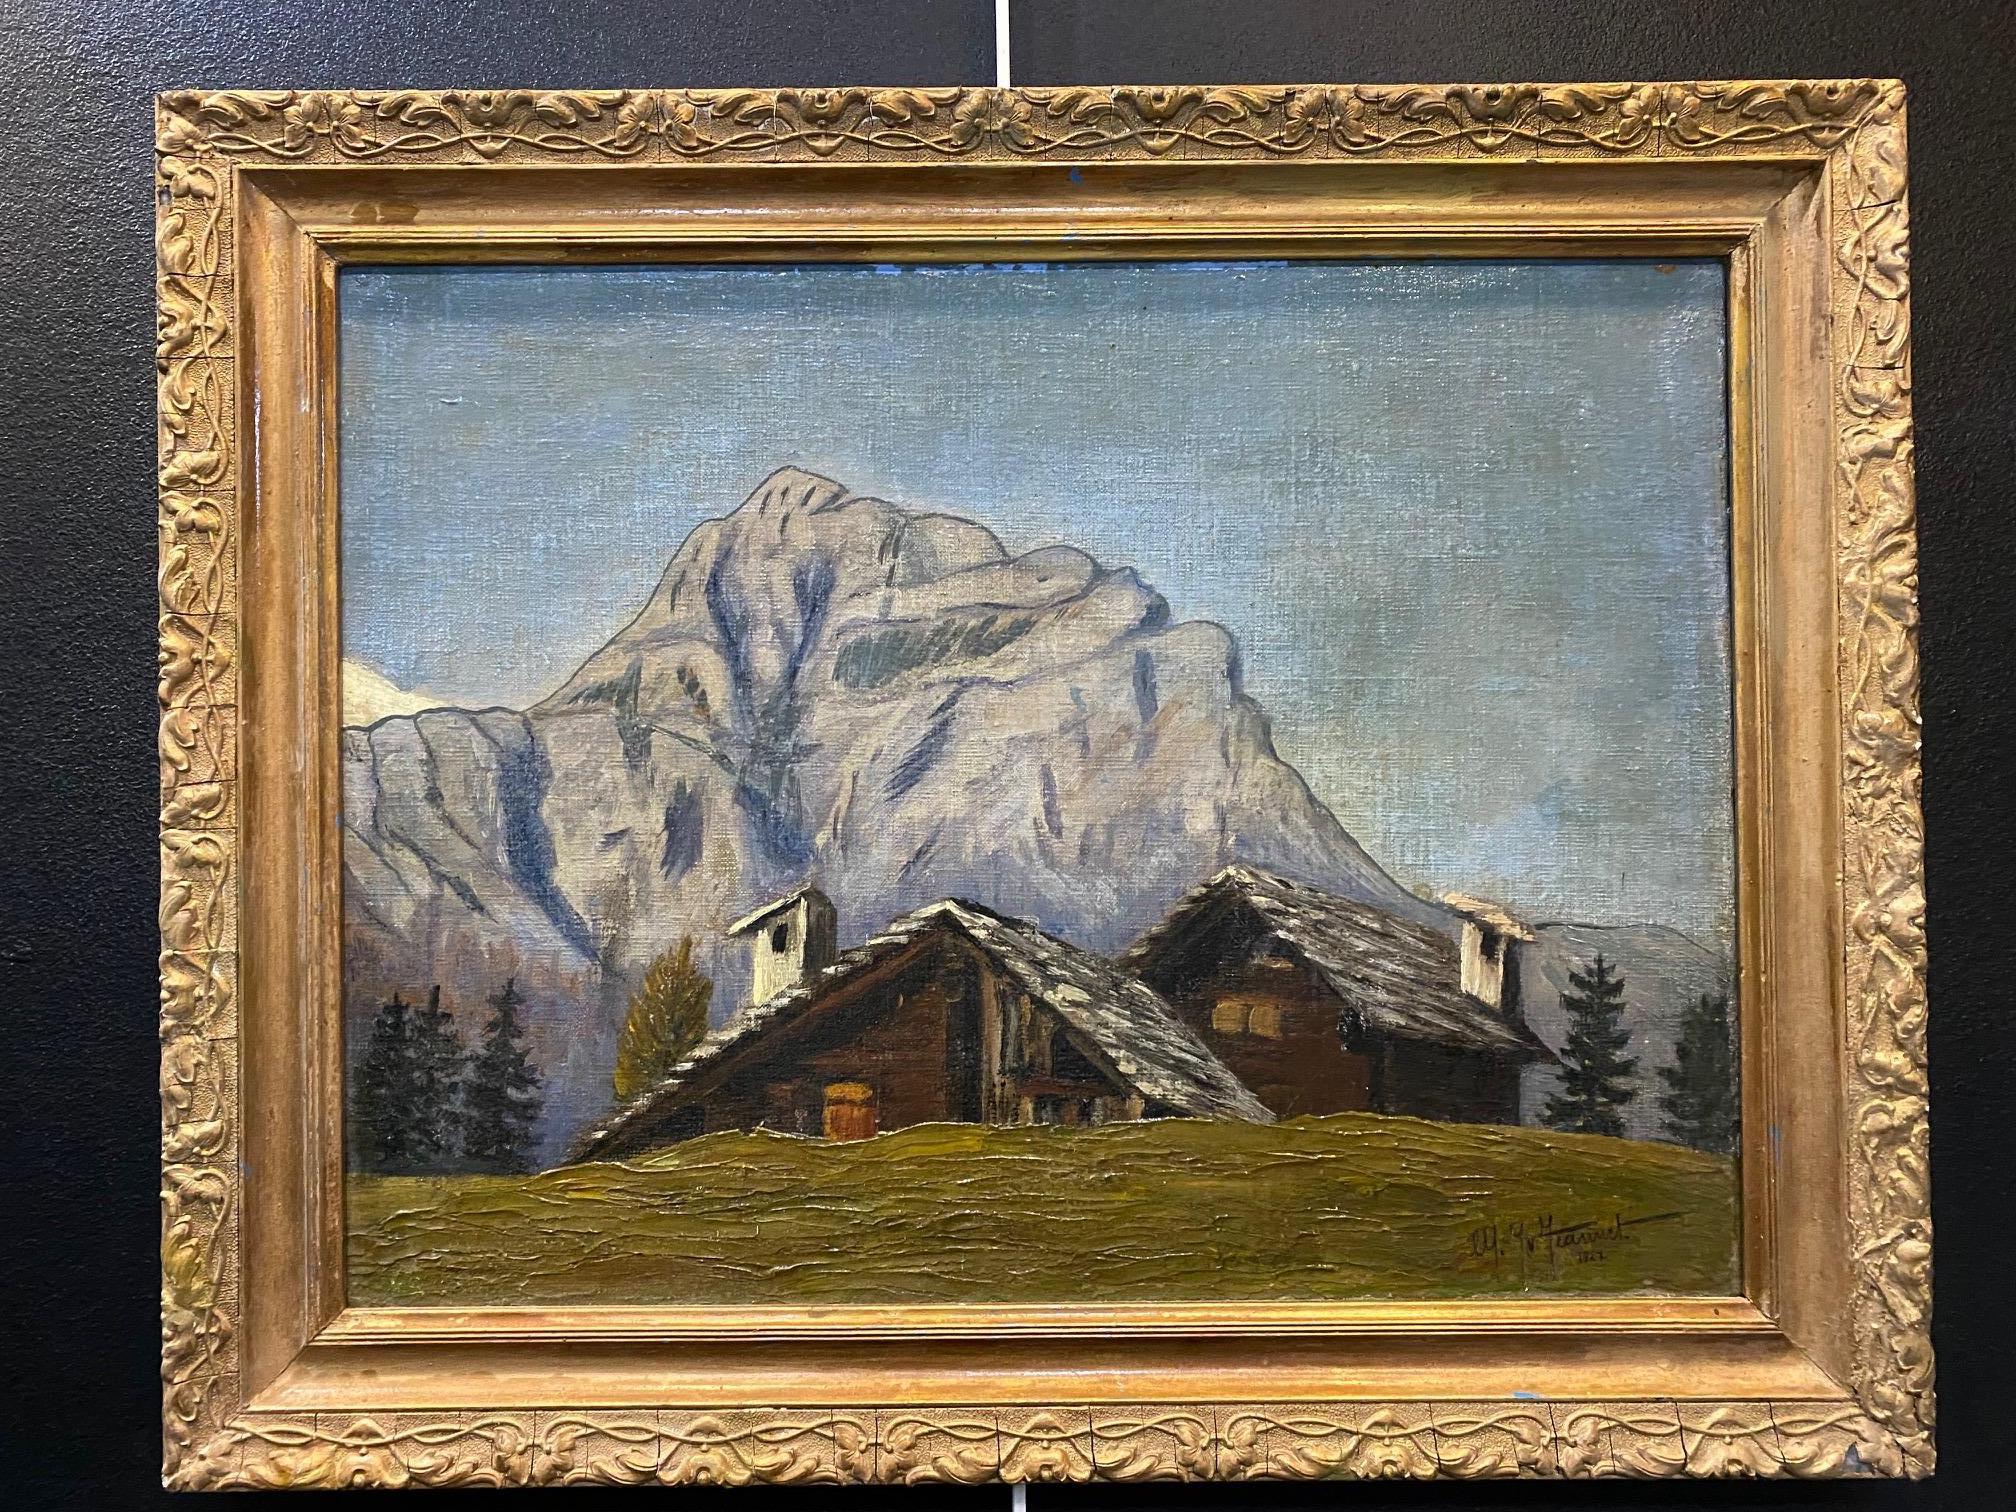 Swiss chalets (1927) - Oil on canvas 35x46 cm - Painting by Unknown